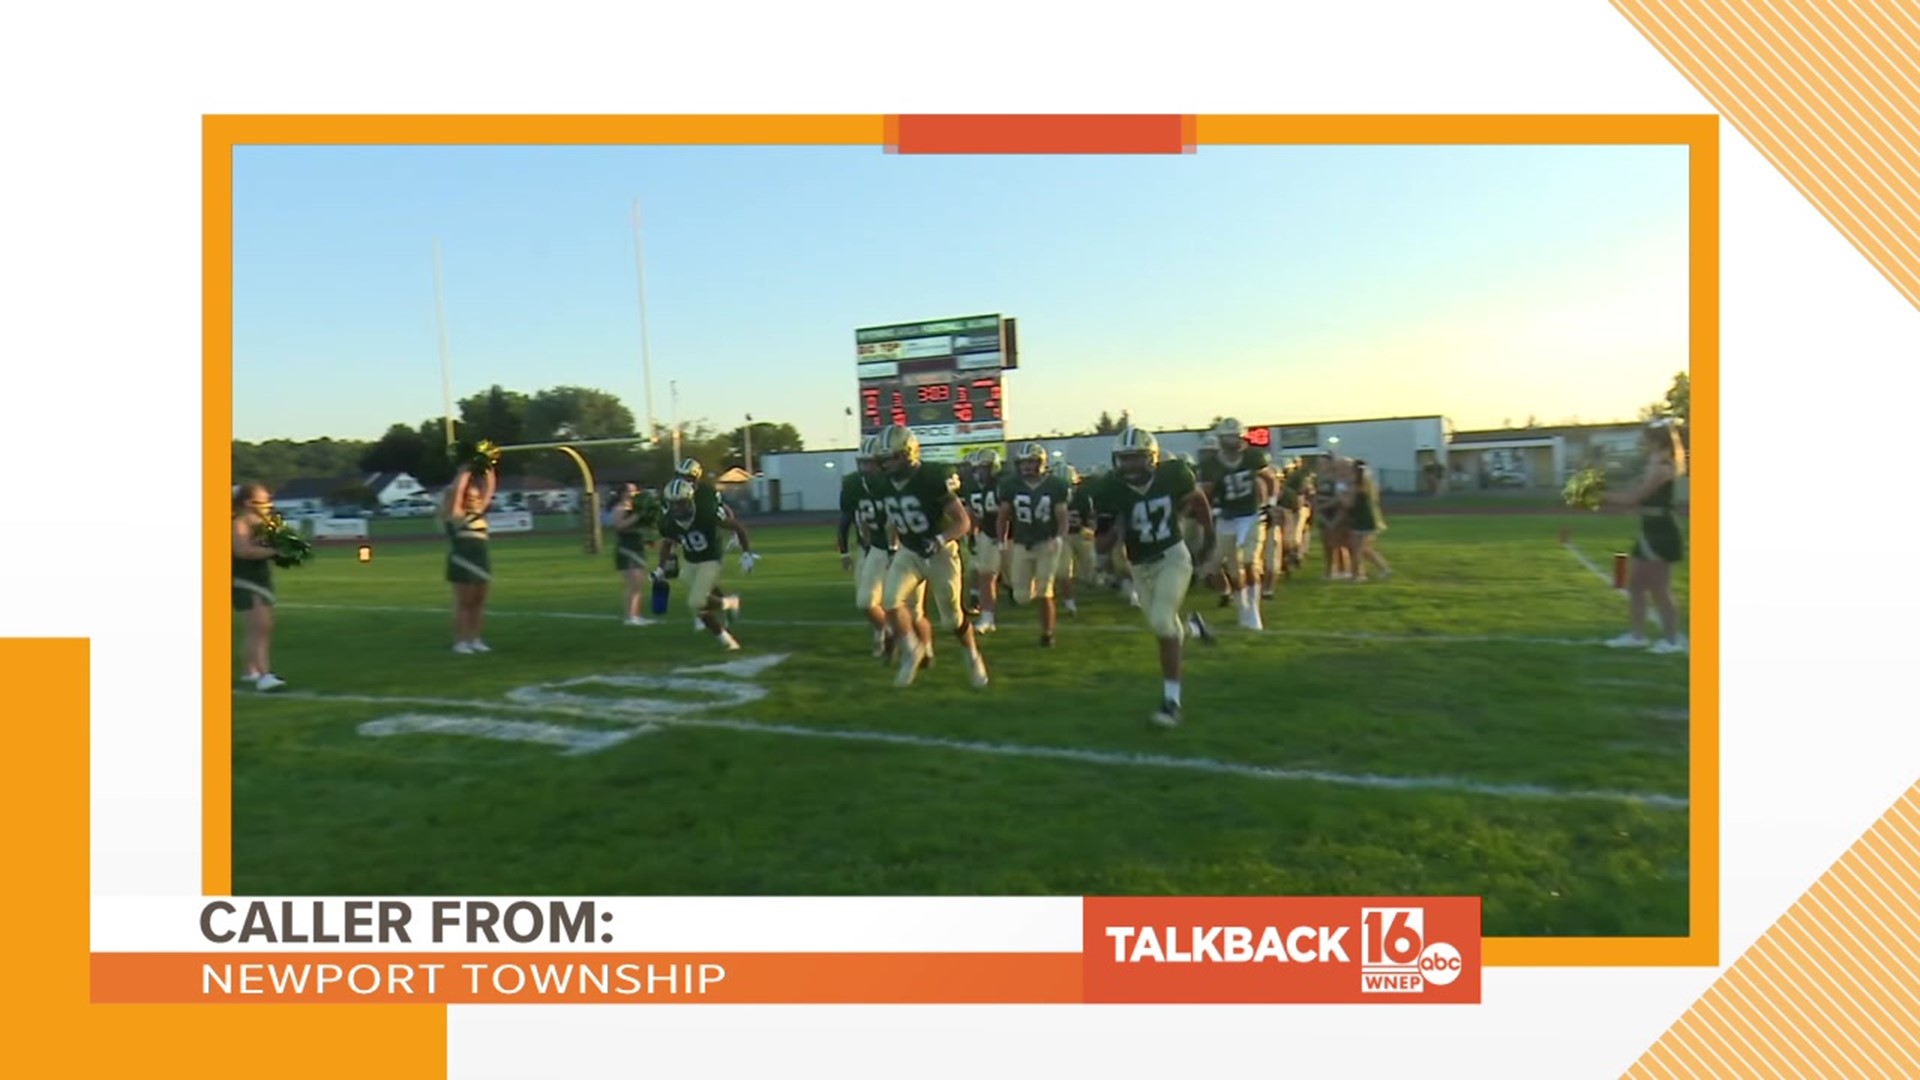 A caller from Newport Township feels cheerleaders and the band should be able to attend high school football games.